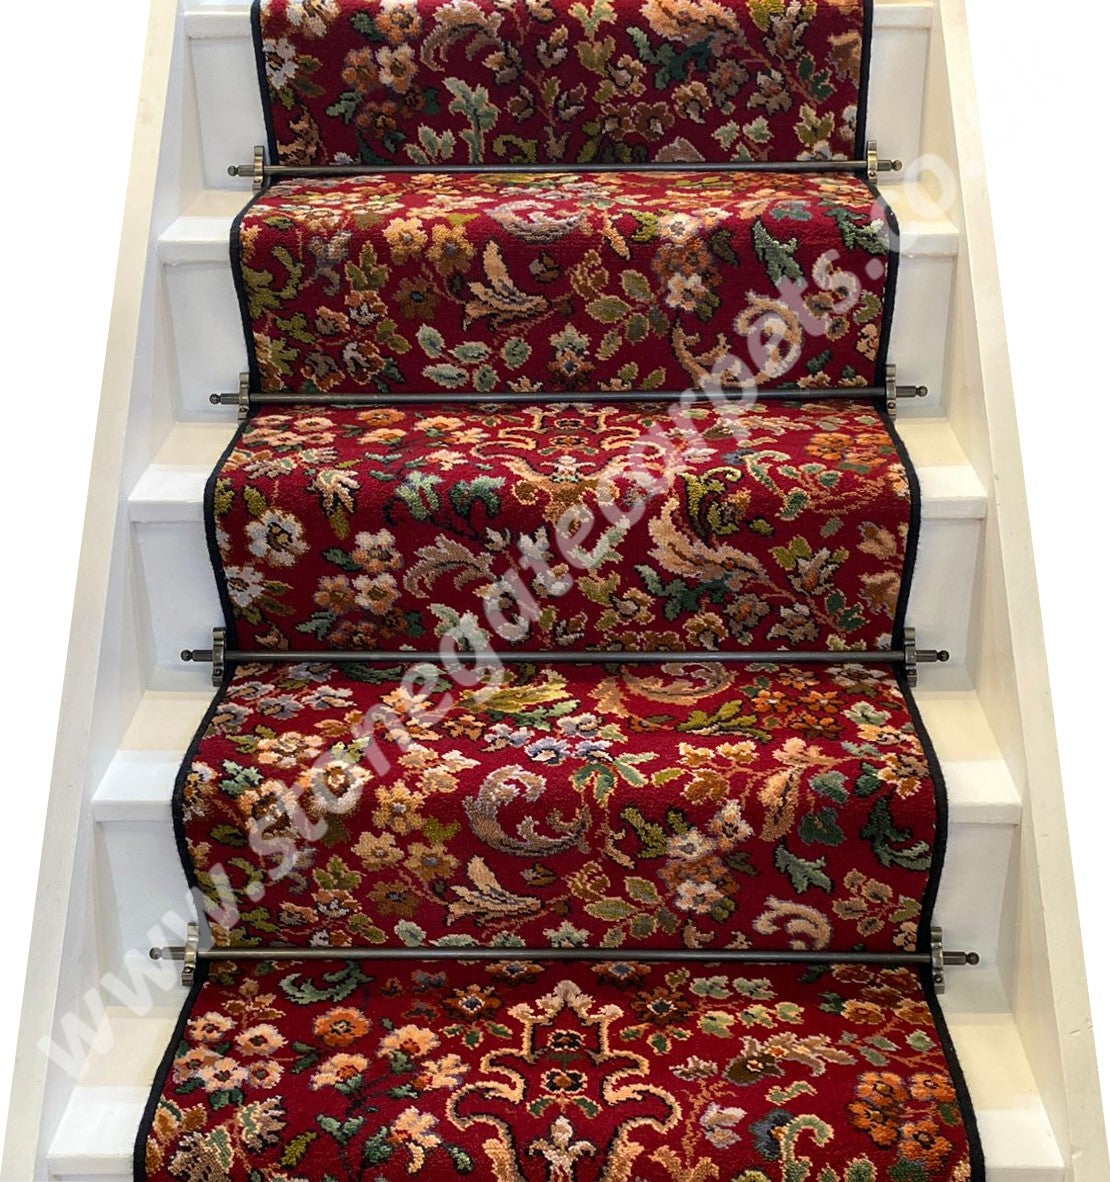 Ulster Carpets Glenmoy Persian Garden Stair Runner with choice of adding bespoke border or overlocking colour (per linear metre)